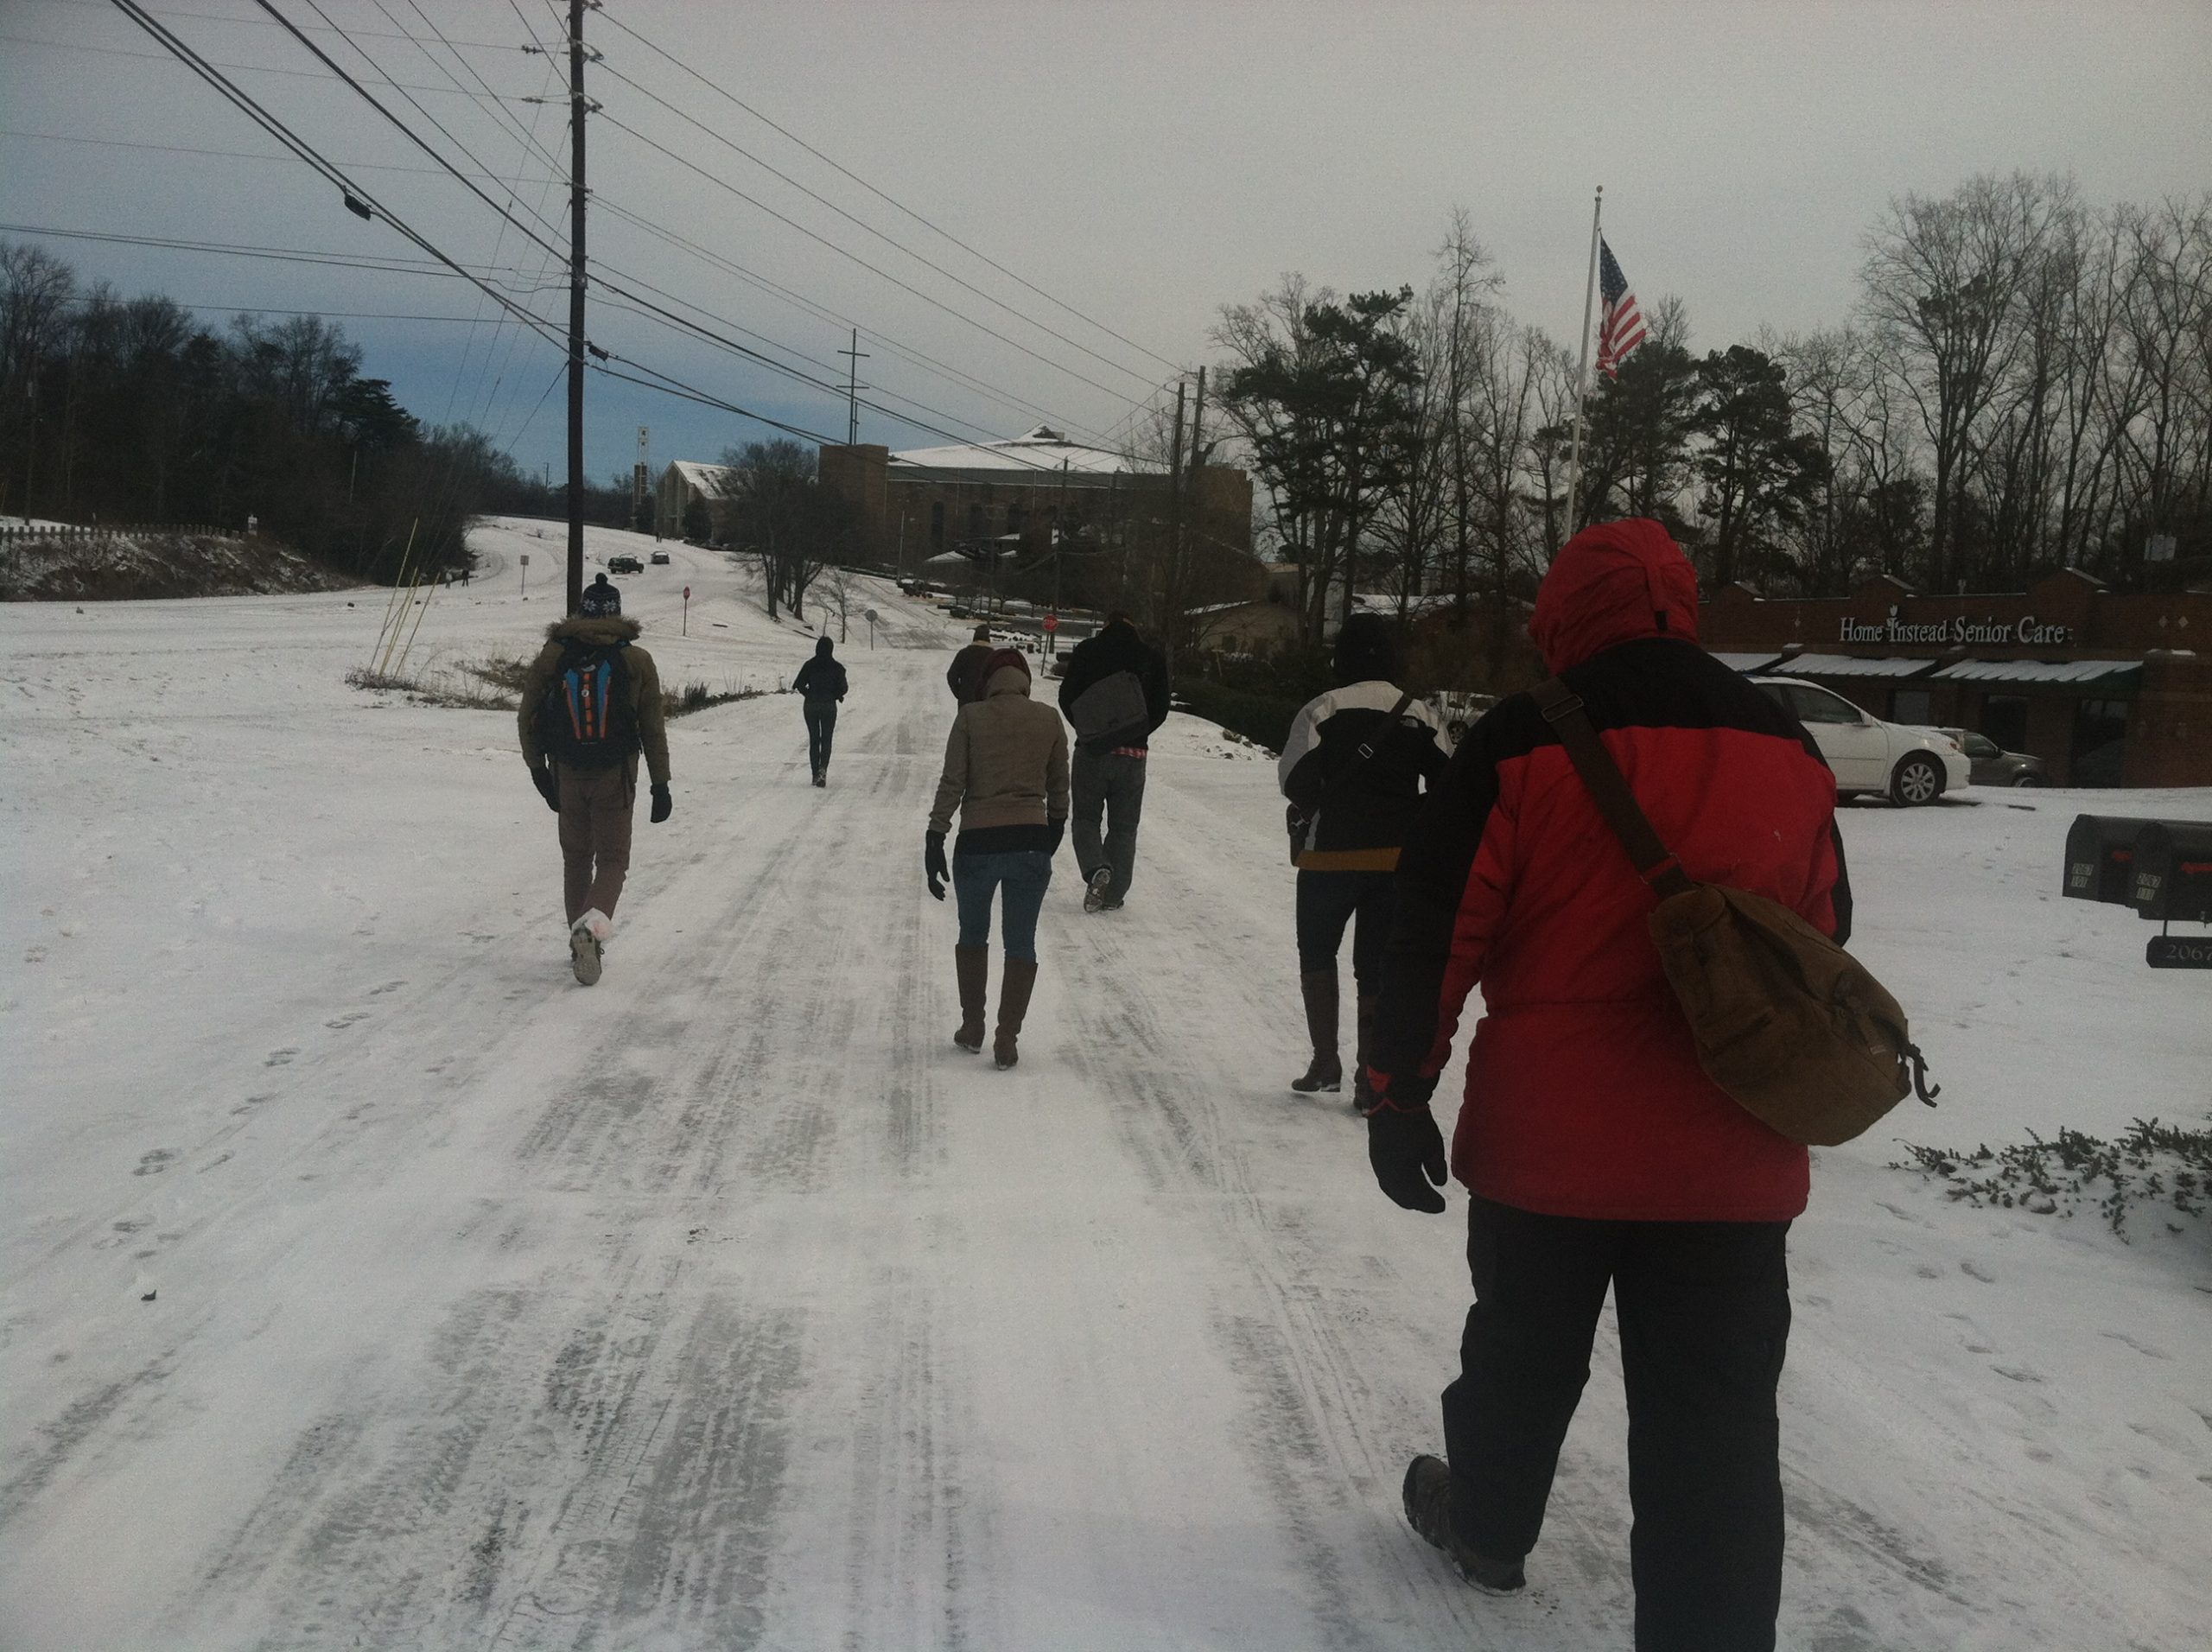 Infomedia employees walking in the snow